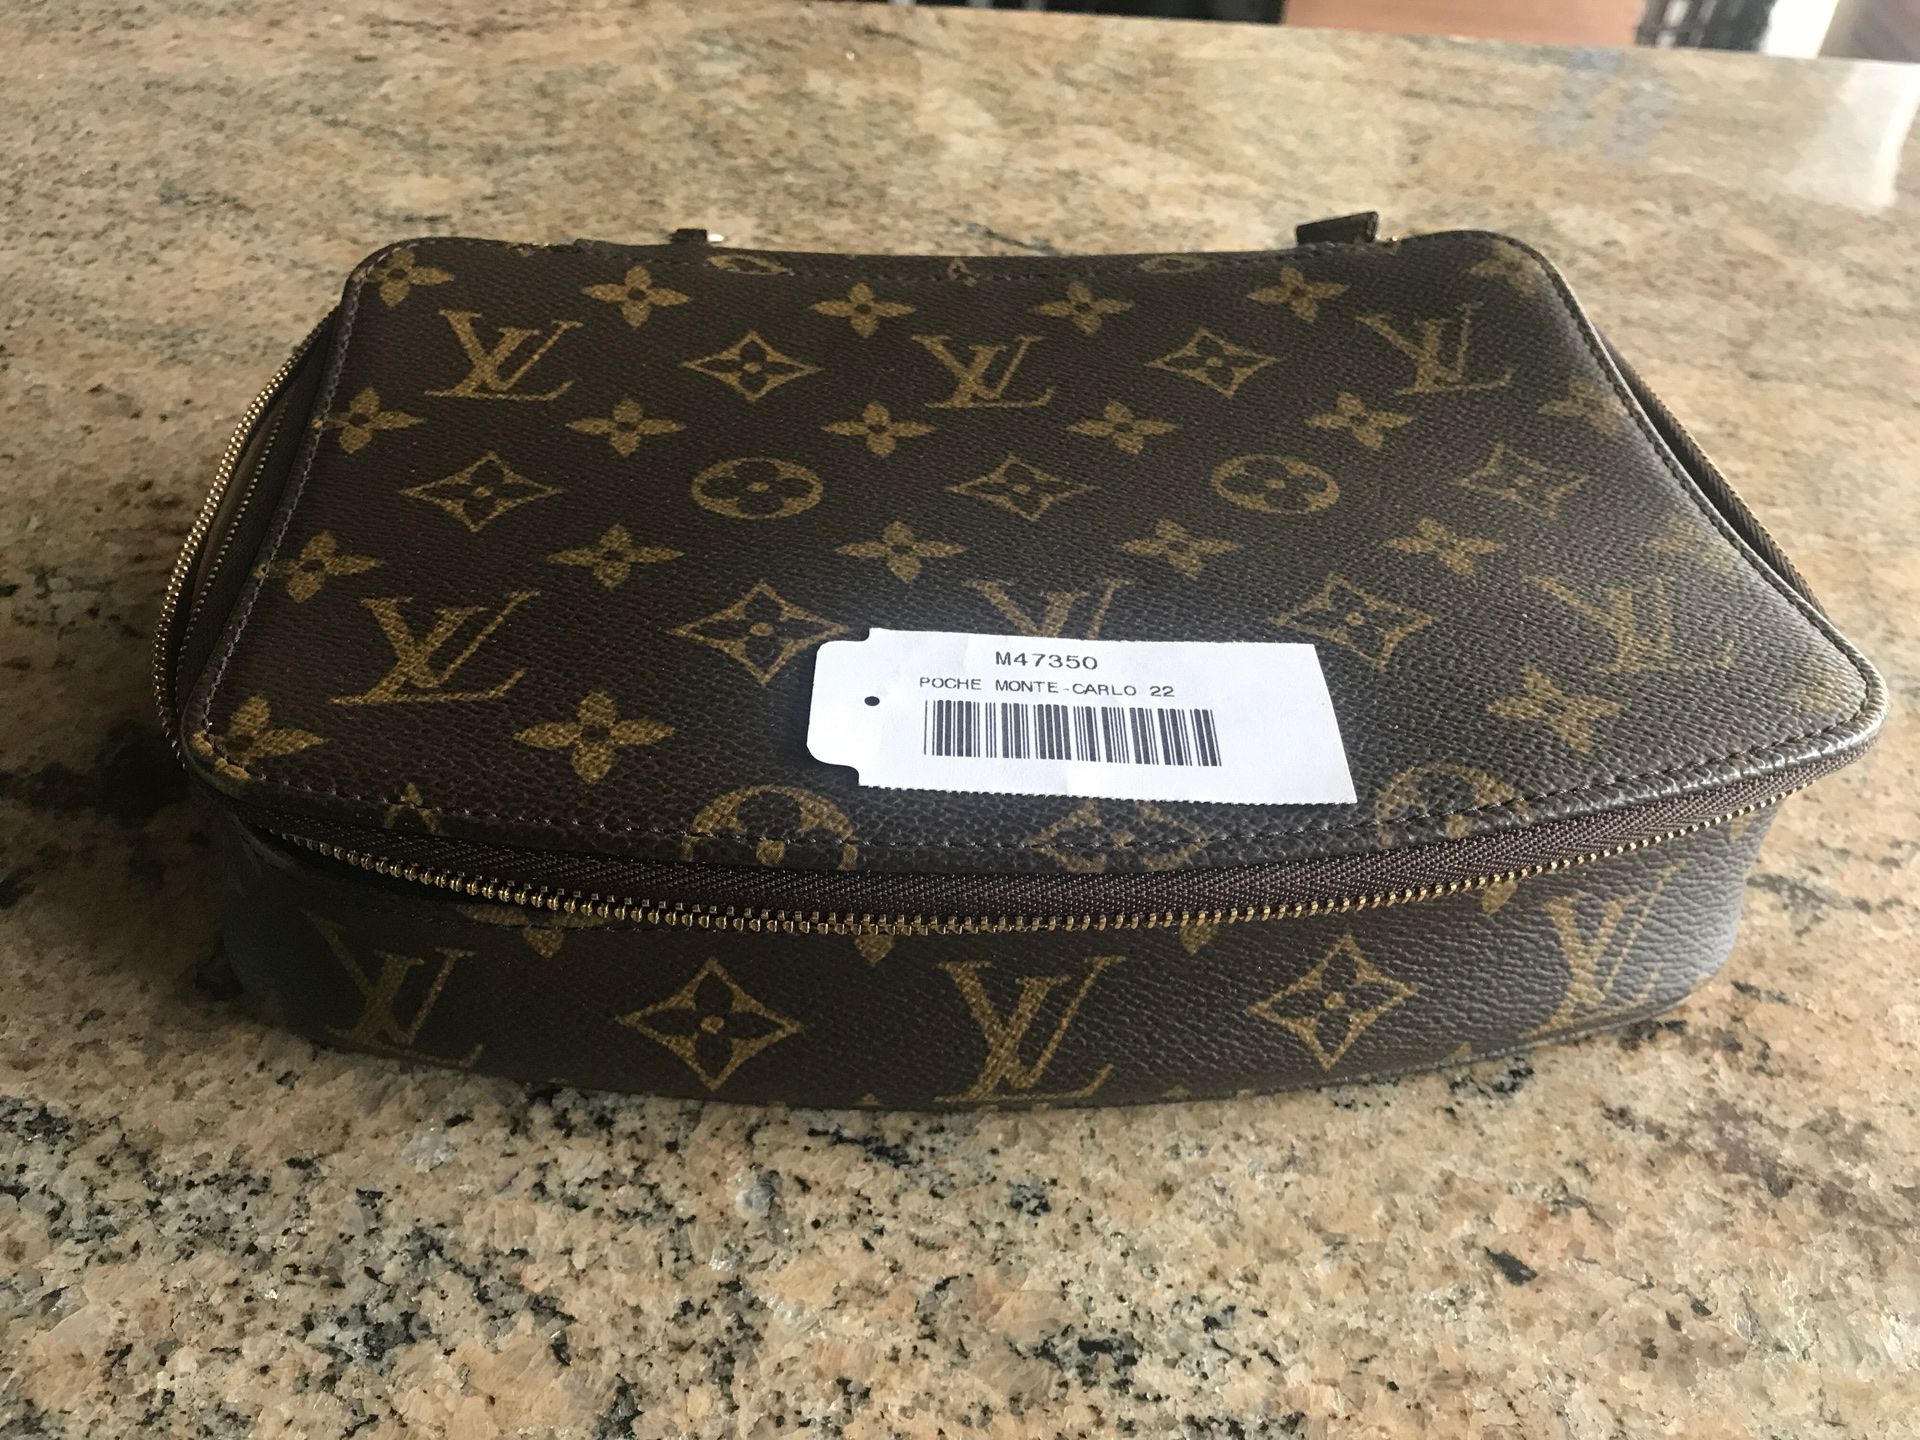 Buy Free Shipping Authentic Pre-owned Louis Vuitton Monogram Poche Monte- carlo PM Jewelry Case Box M47352 210835 from Japan - Buy authentic Plus  exclusive items from Japan